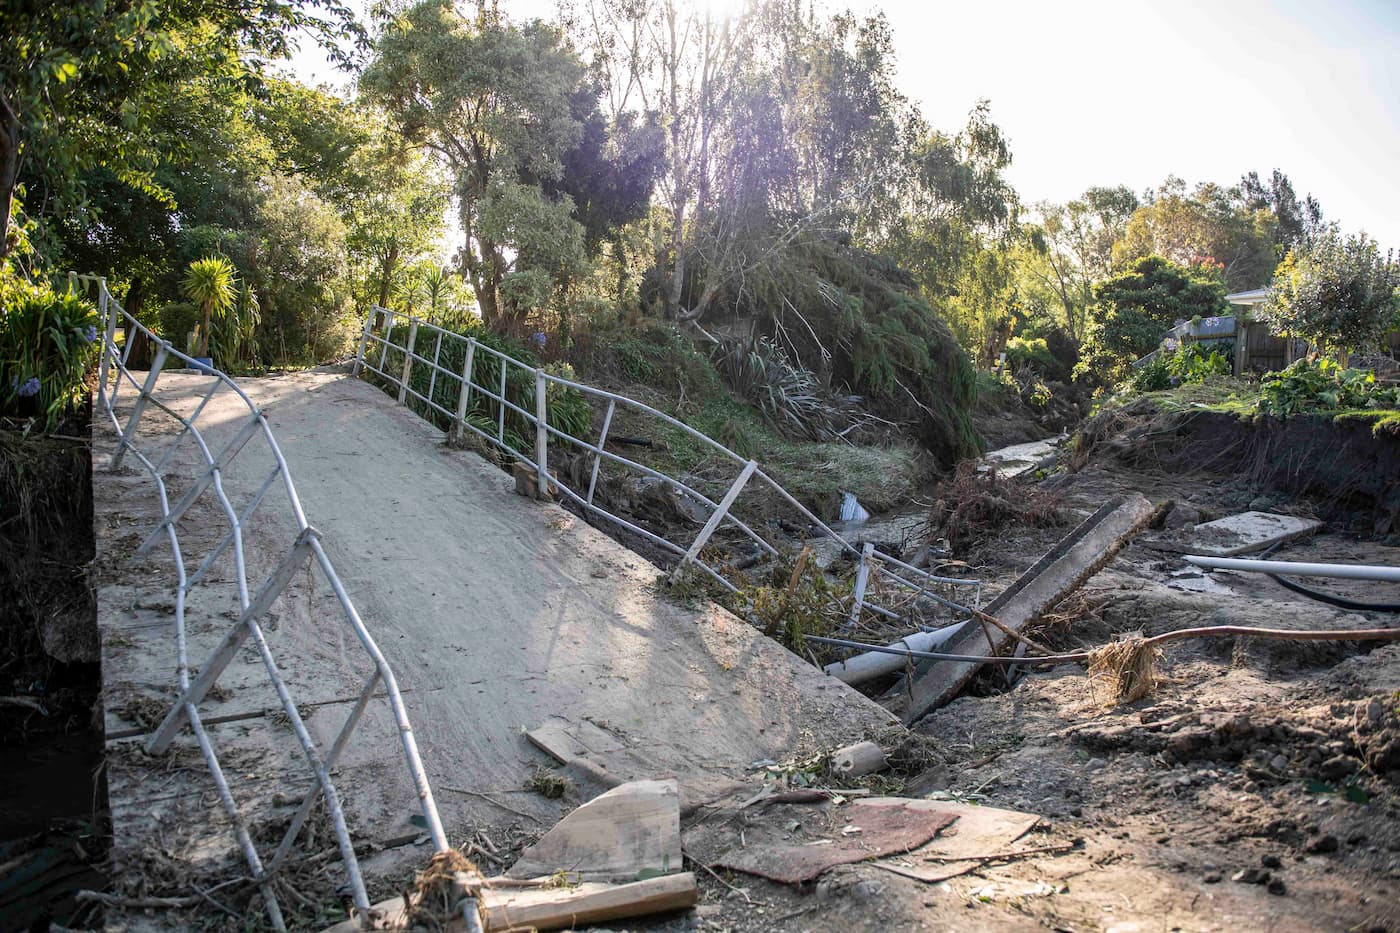 A street in Havelock North in clean up mode after suffering from a burst river bank flowing behind several houses. Members of the community and HMNZS Te Mana aided with the clean up.